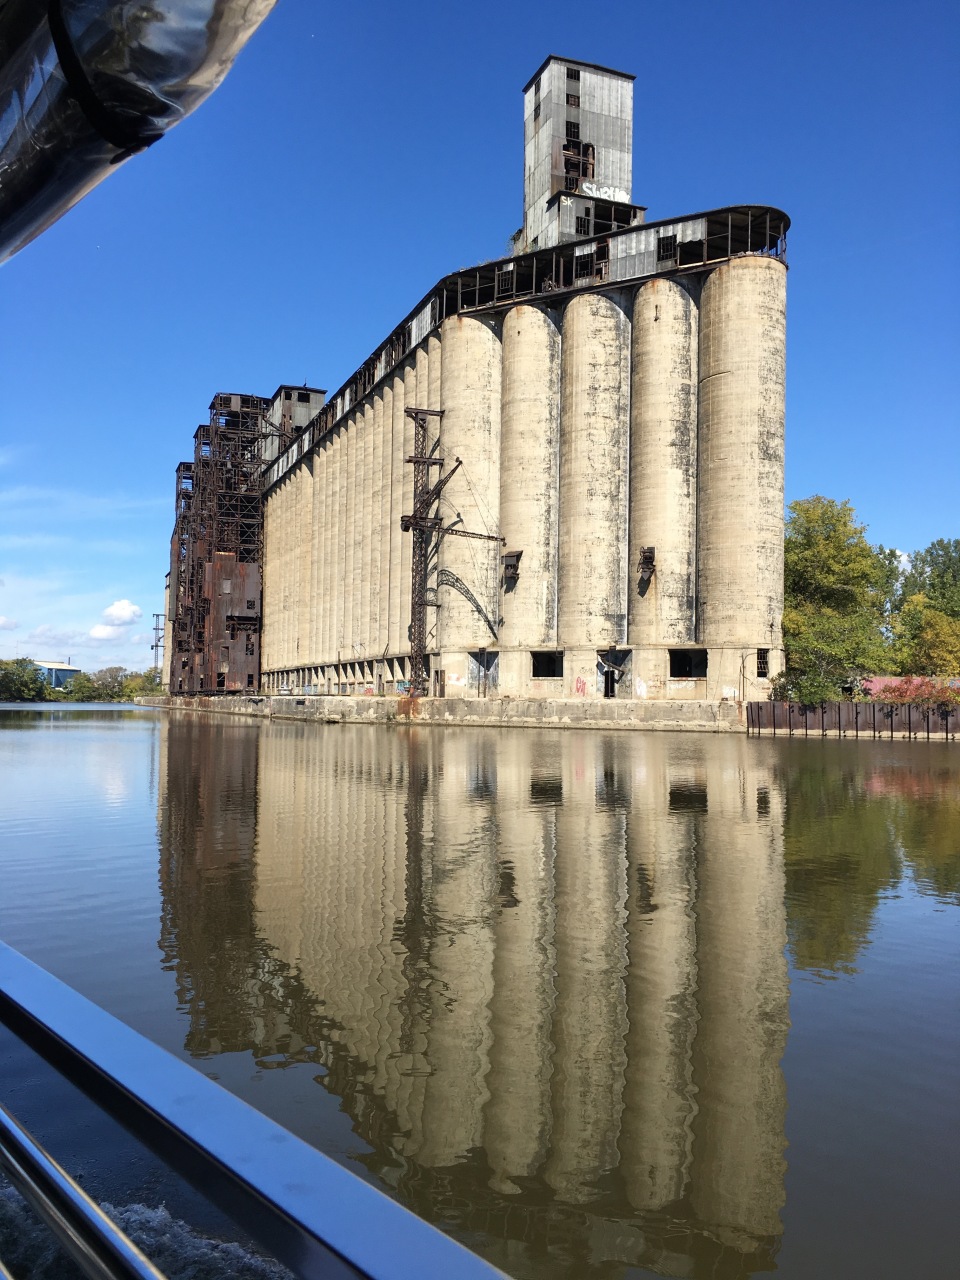 In the Buffalo River and City Ship Canal viewing the amazing silos...